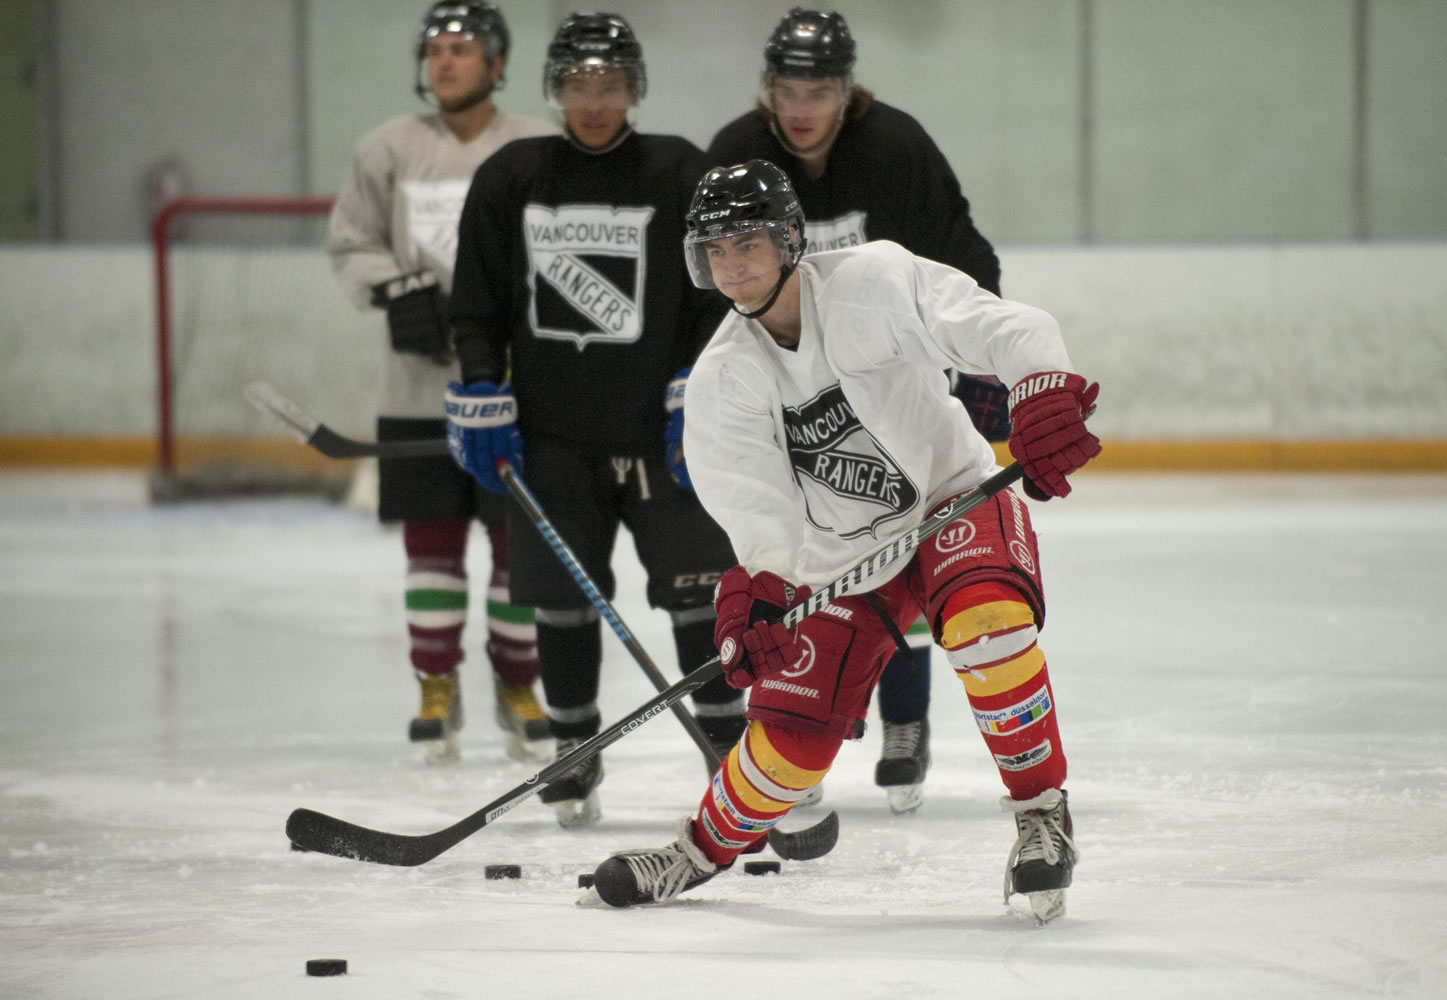 Grayson Szumilas from Camden Main at the Rangers Hockey team at a practice session in Vancouver Monday September 14, 2015.